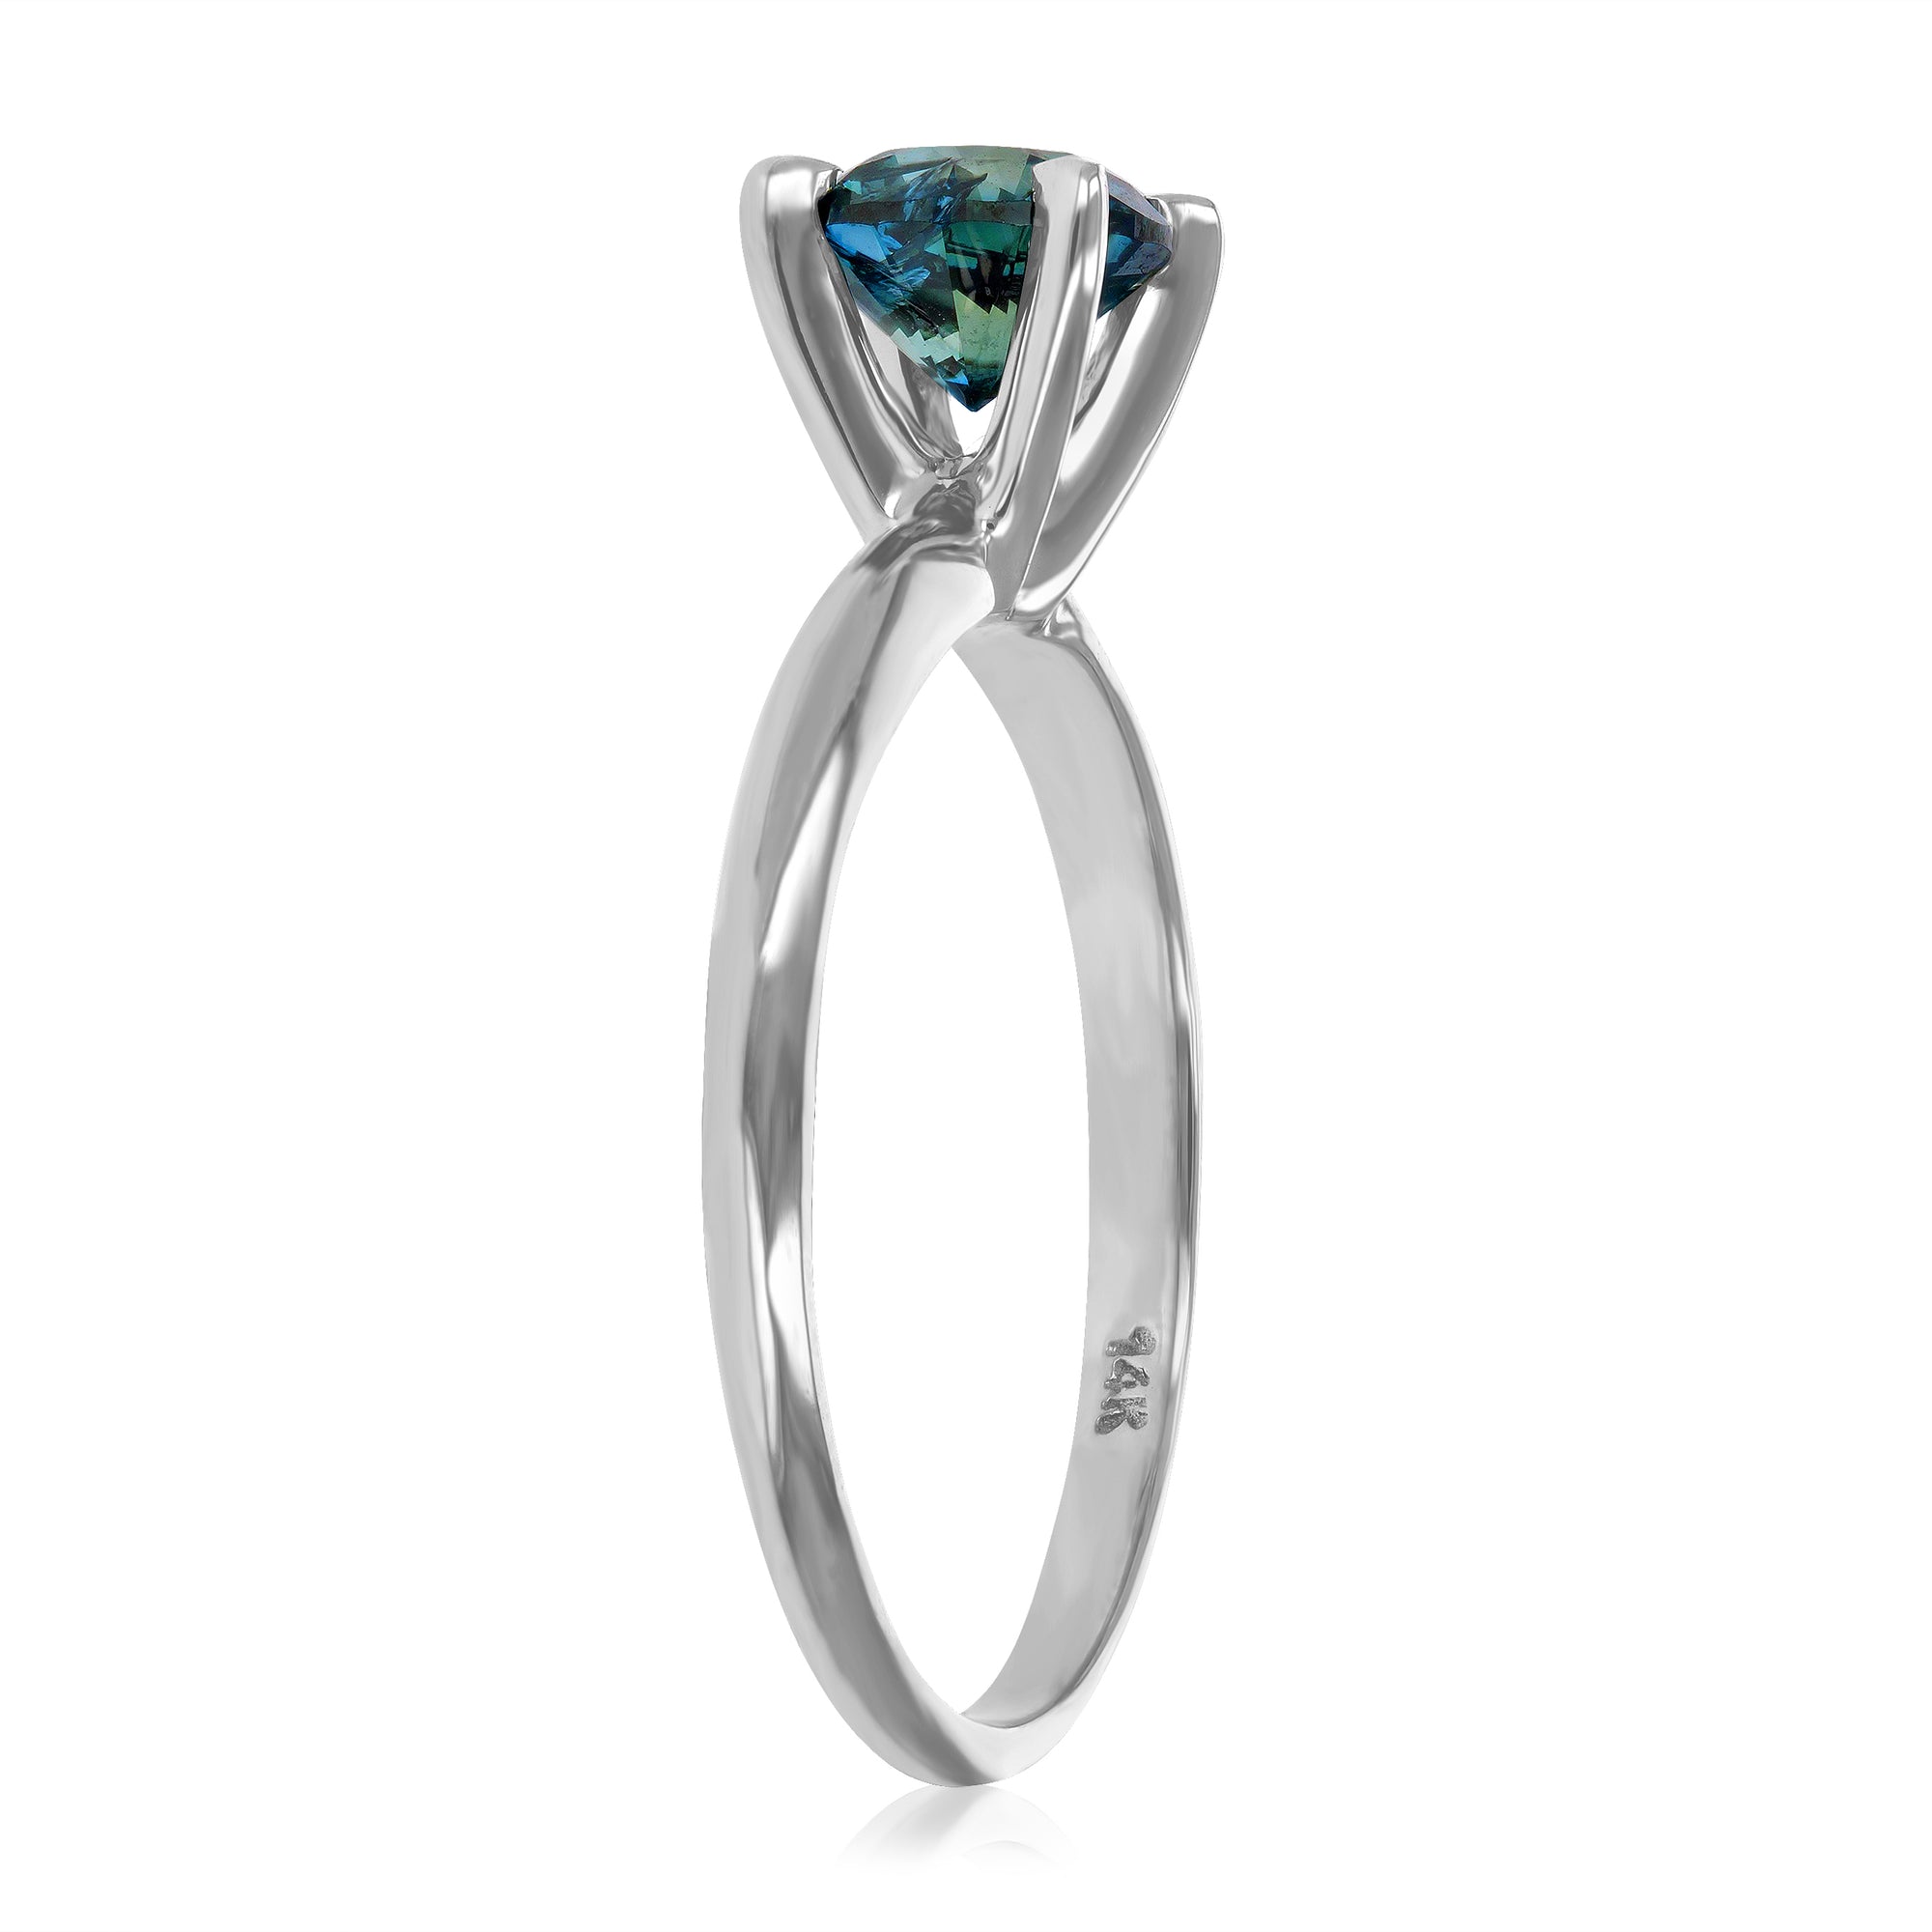 1 cttw IGI Certified I1 Clarity Blue Diamond Solitaire Ring 14K White Gold Size 7